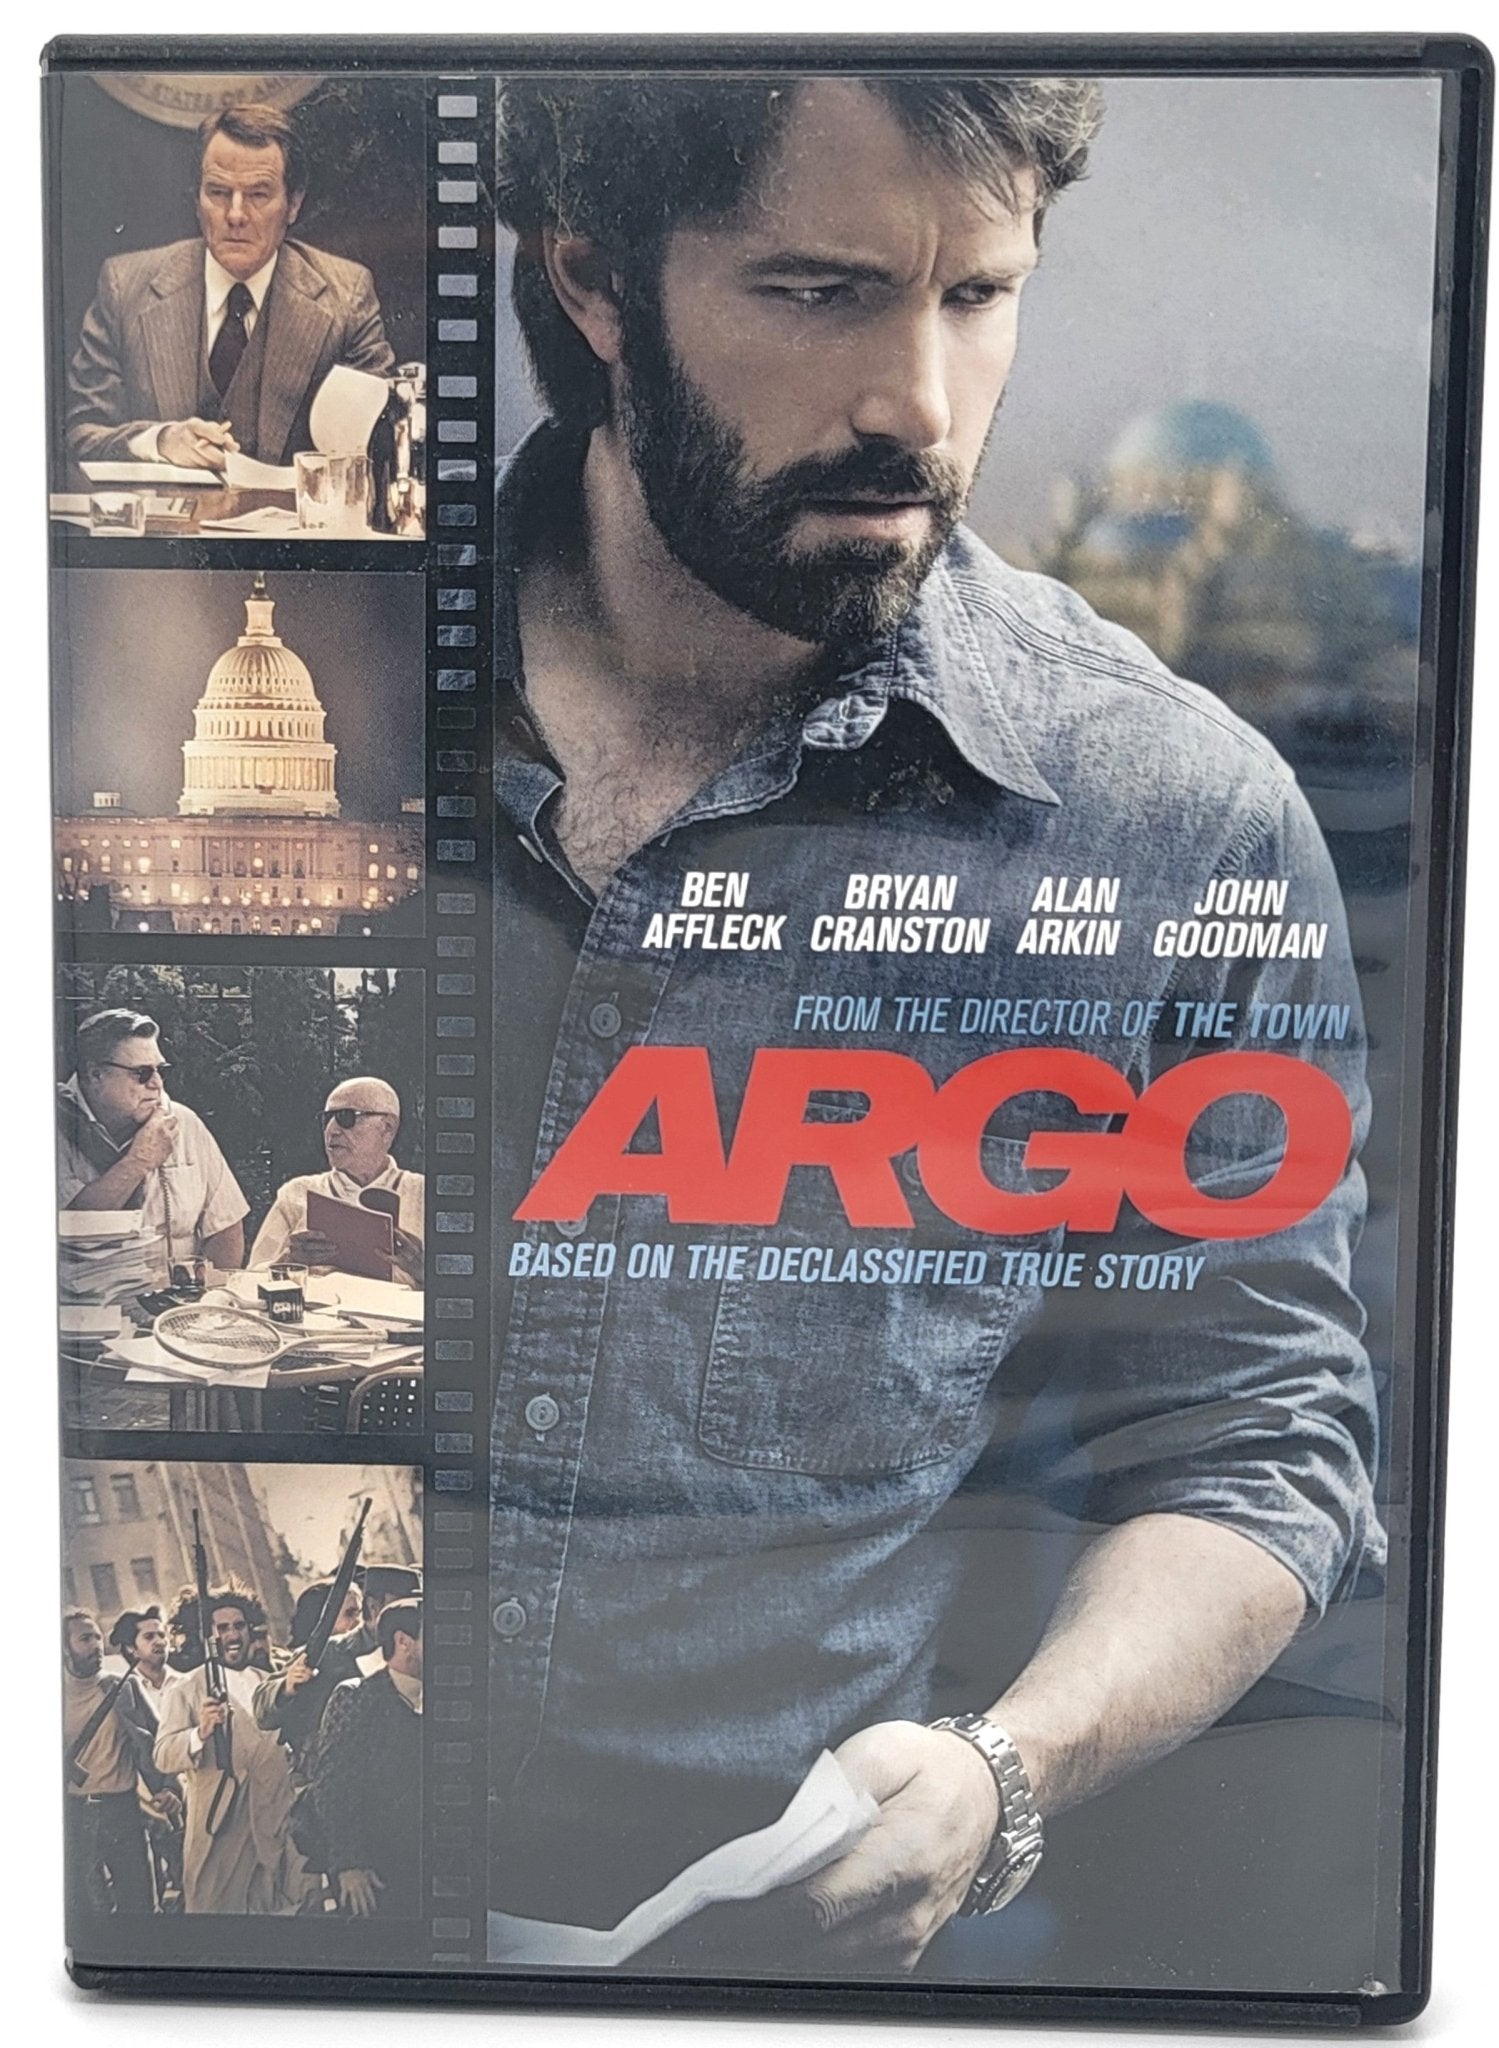 Warner Brothers - Argo | DVD | Based on The Declassified True Story | Widescreen - DVD - Steady Bunny Shop